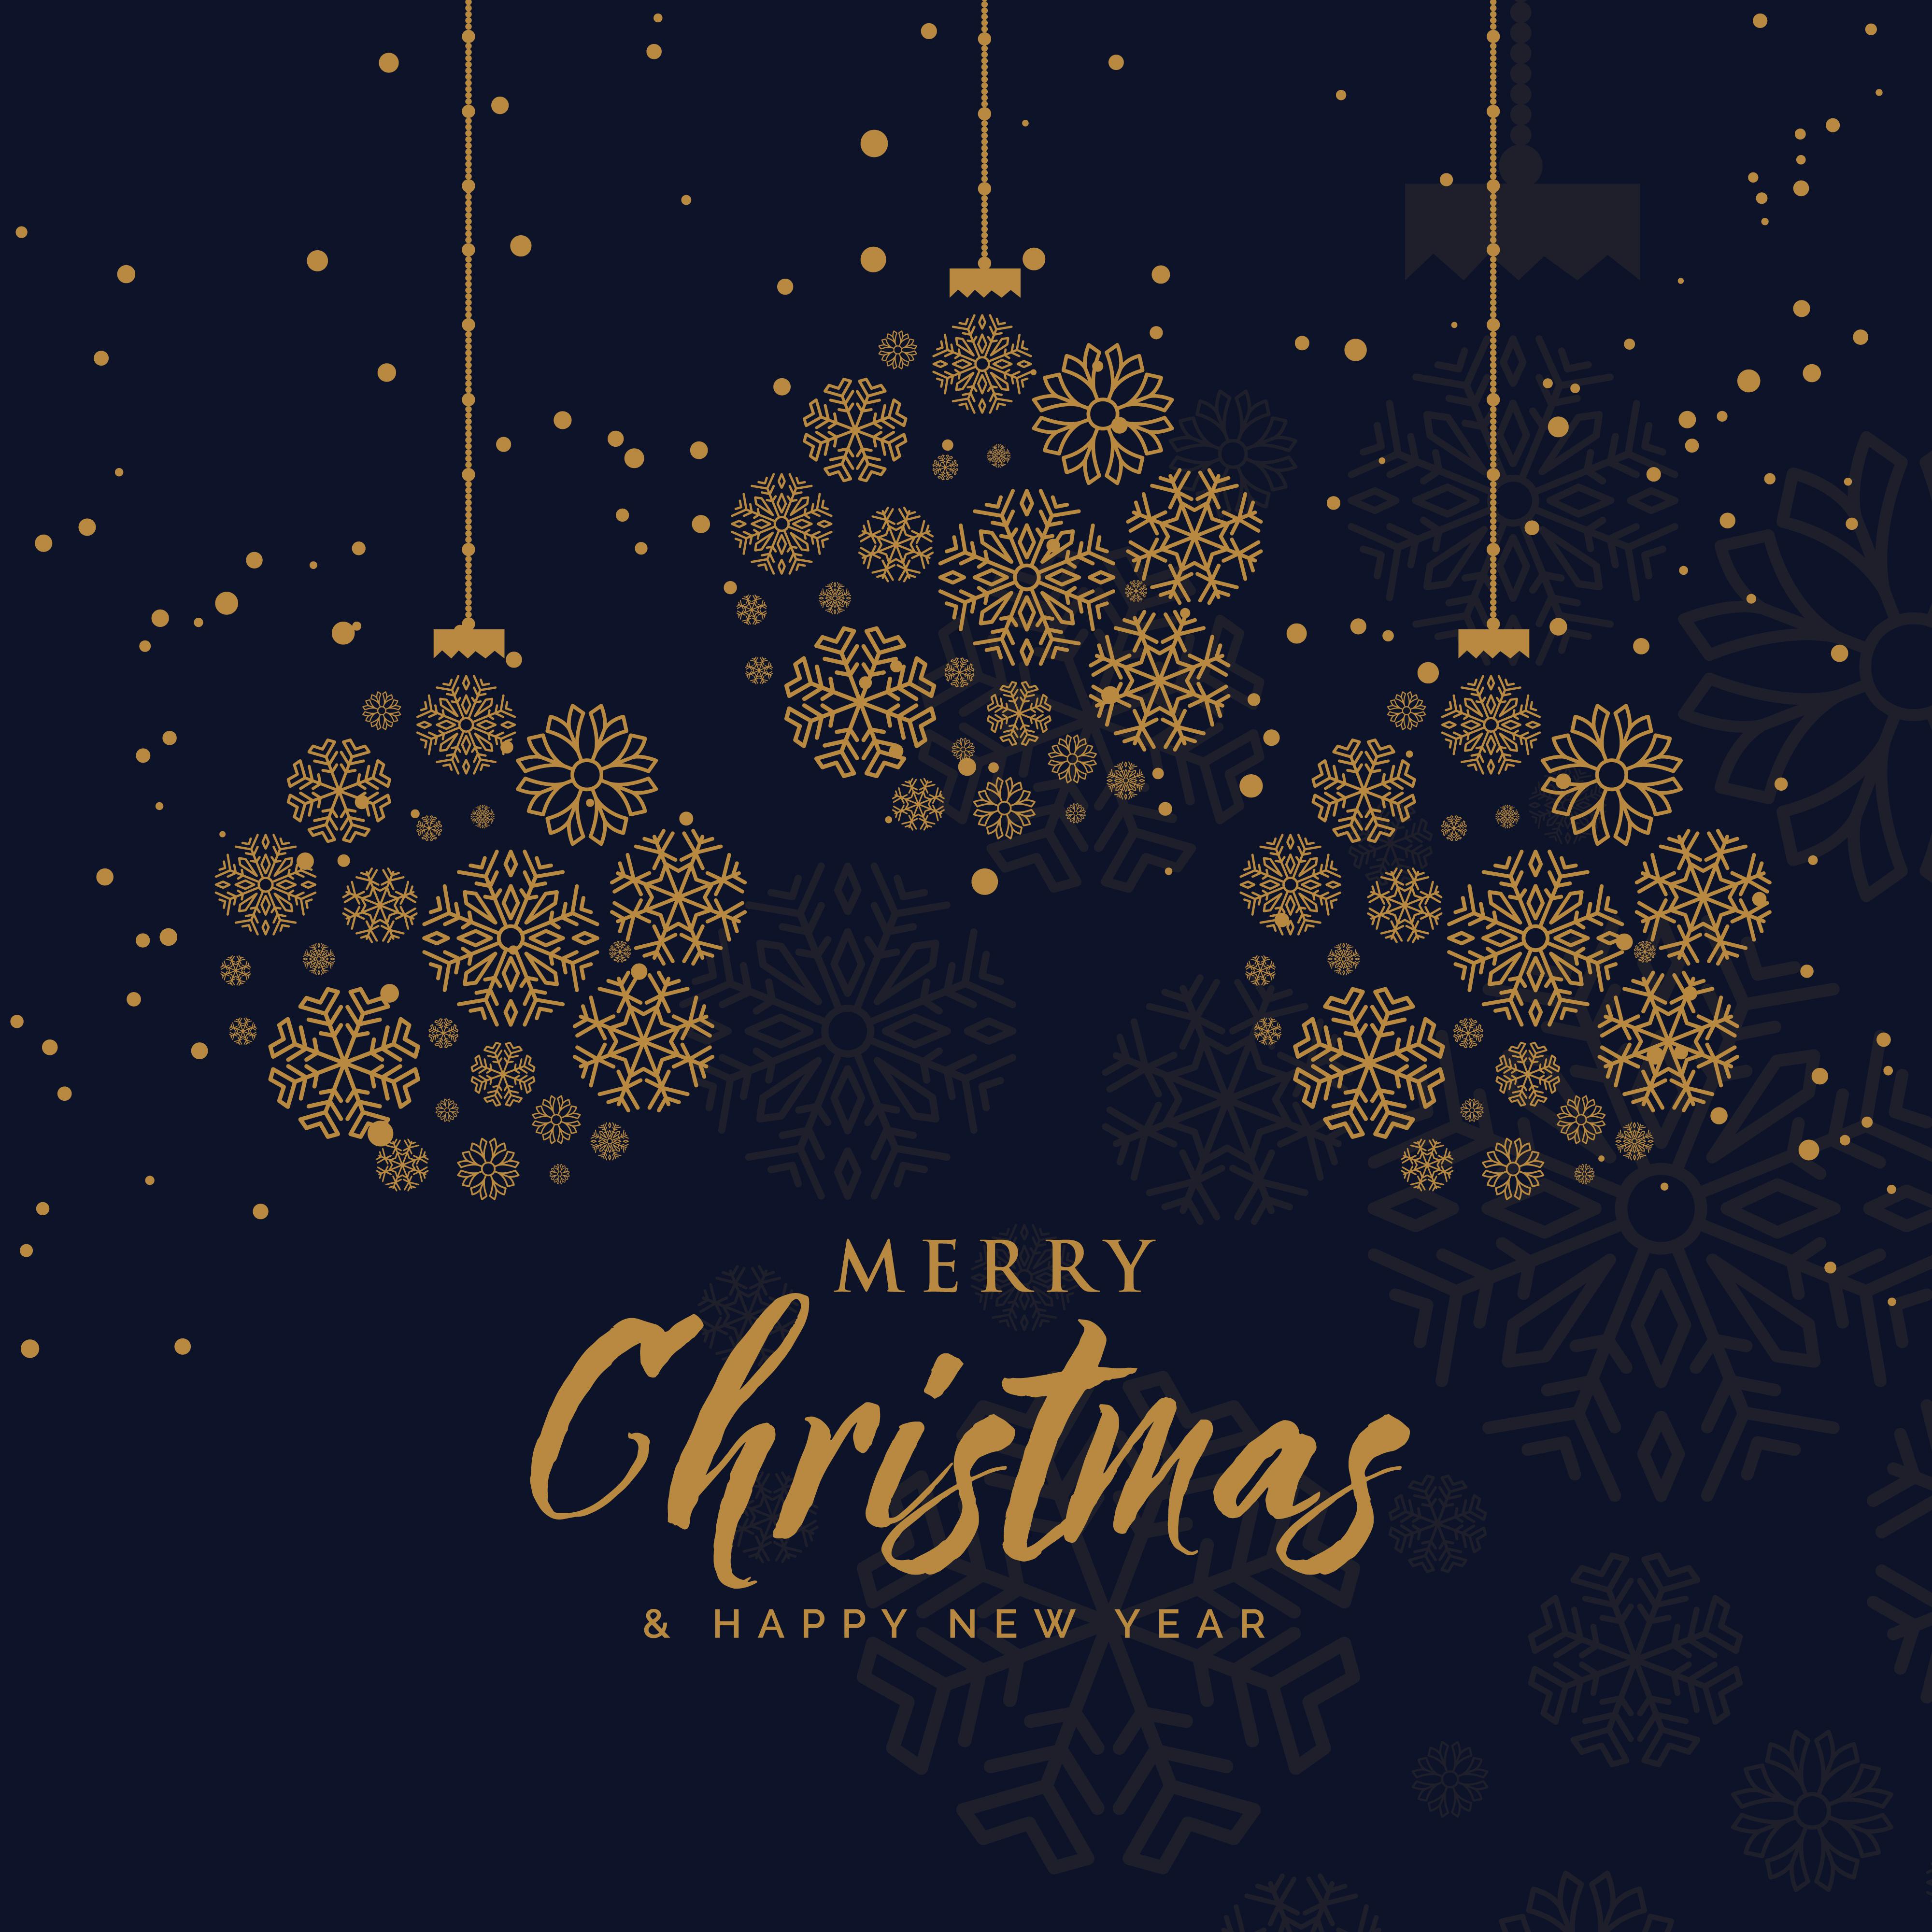 4000 x 4000 · jpeg - elegant merry christmas background made with snowflakes in premi ...